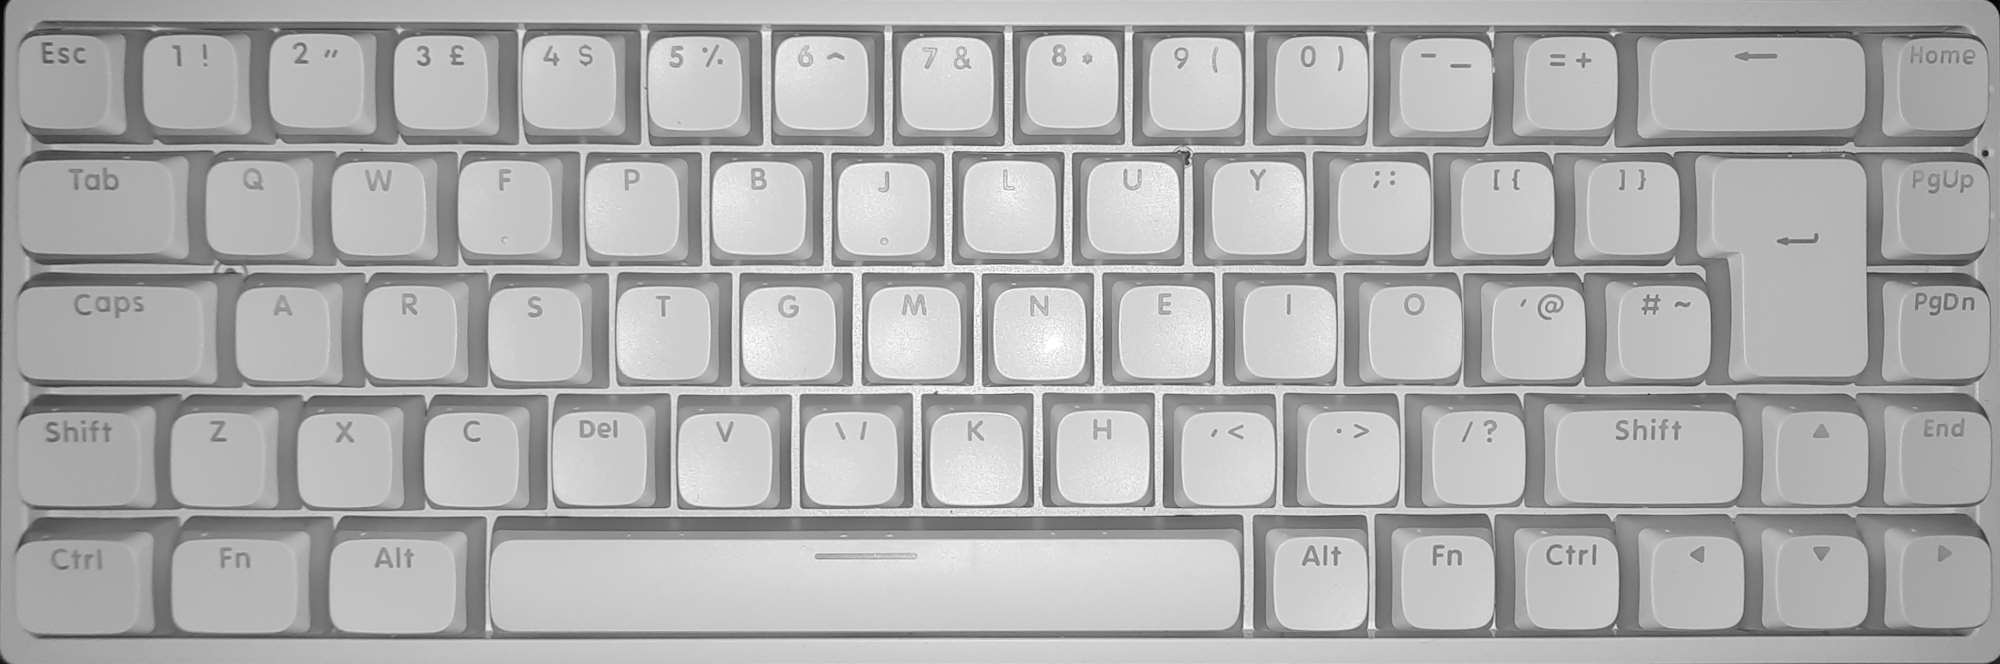 Colemak DH Keyboard Layout